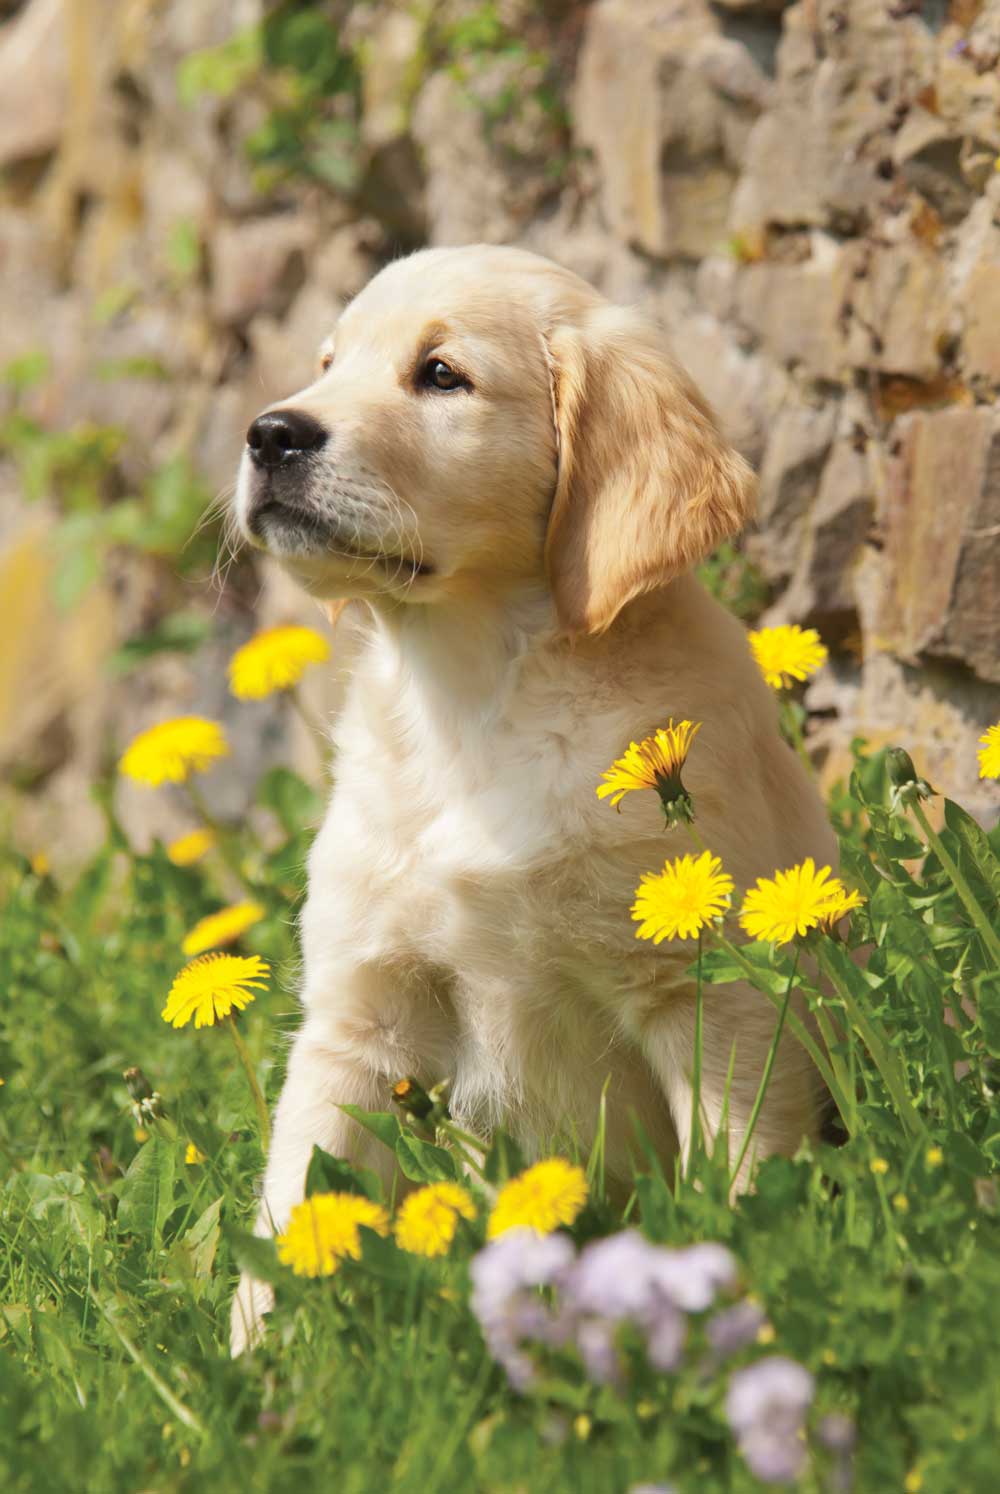 yellow lab puppy in the grass surrounded by dandelions